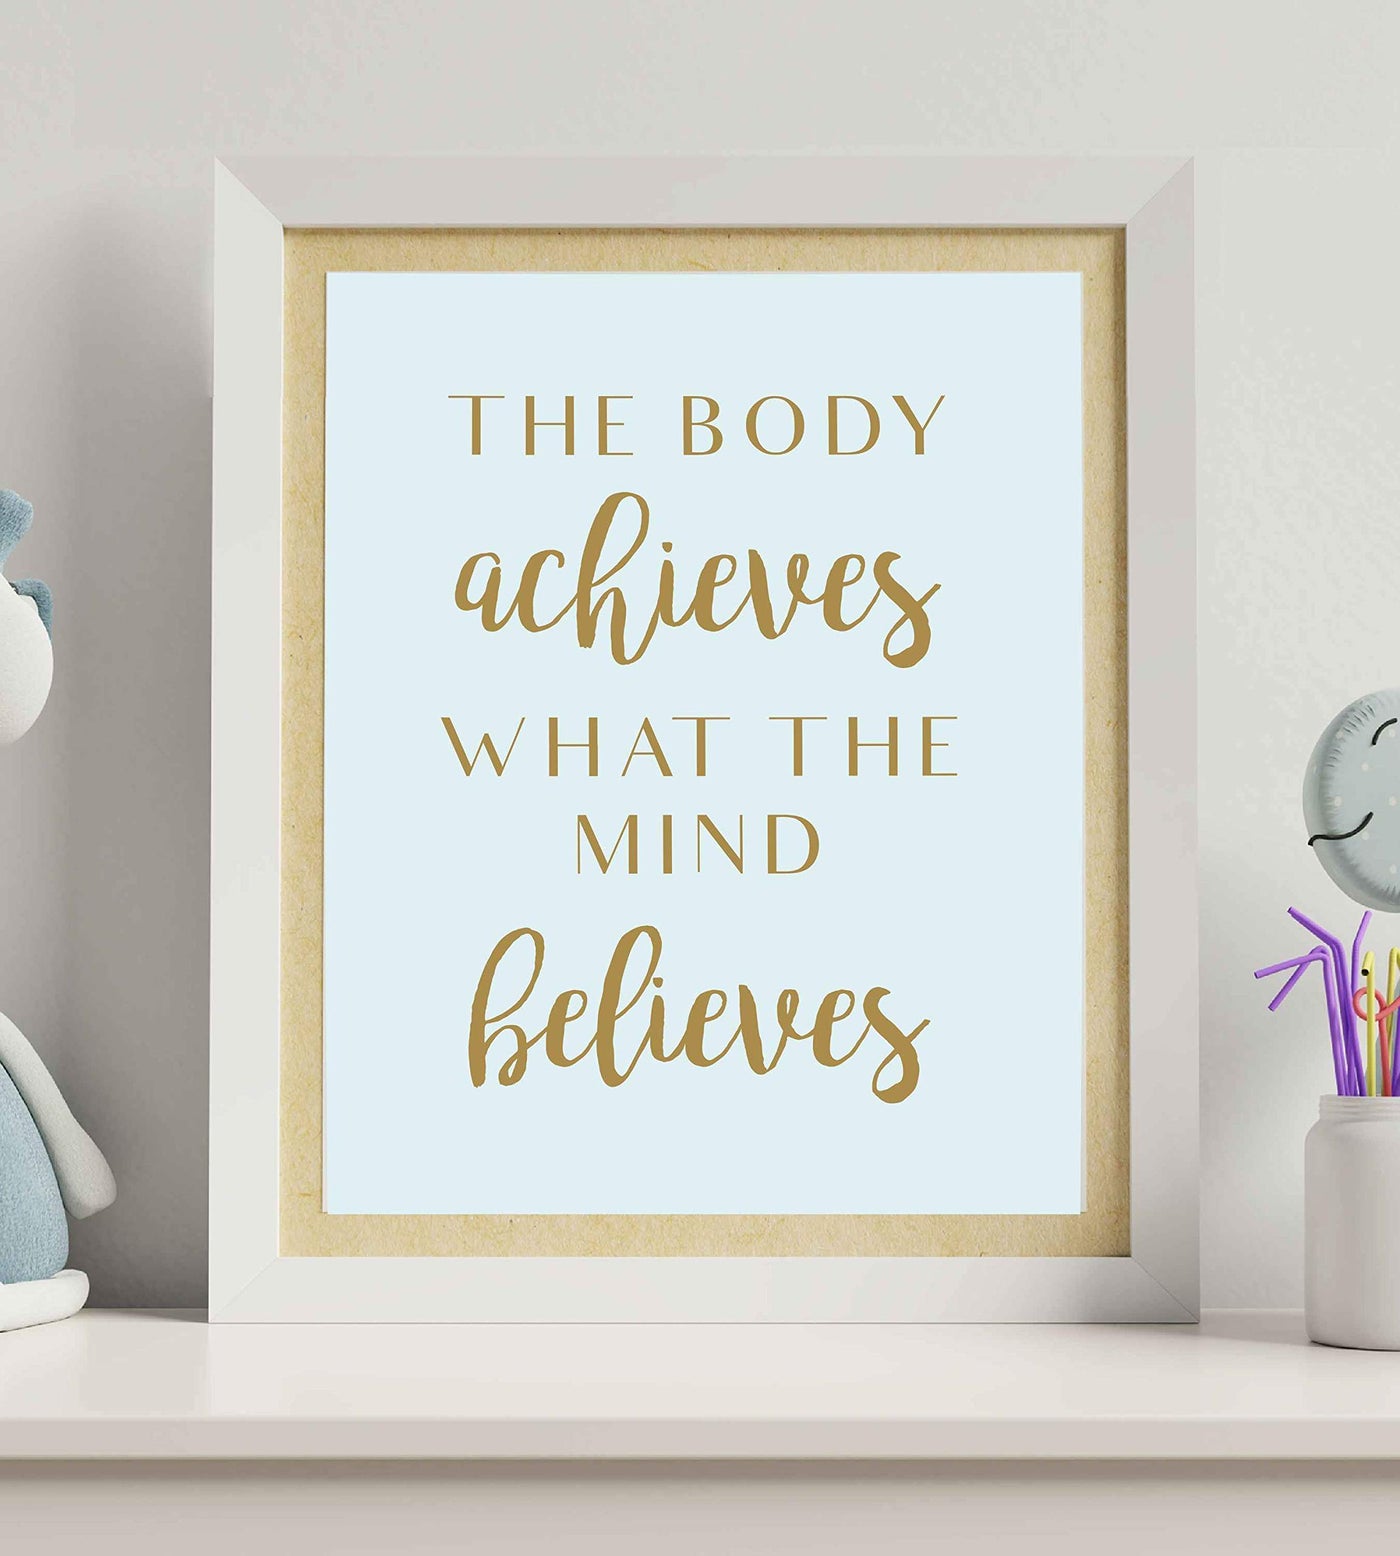 The Body Achieves What The Mind Believes Spiritual Quotes Wall Art-8 x 10" Motivational Typographic Print-Ready to Frame. Home-Studio-Office-Classroom-Zen Decor! Great Positive Decoration for All!